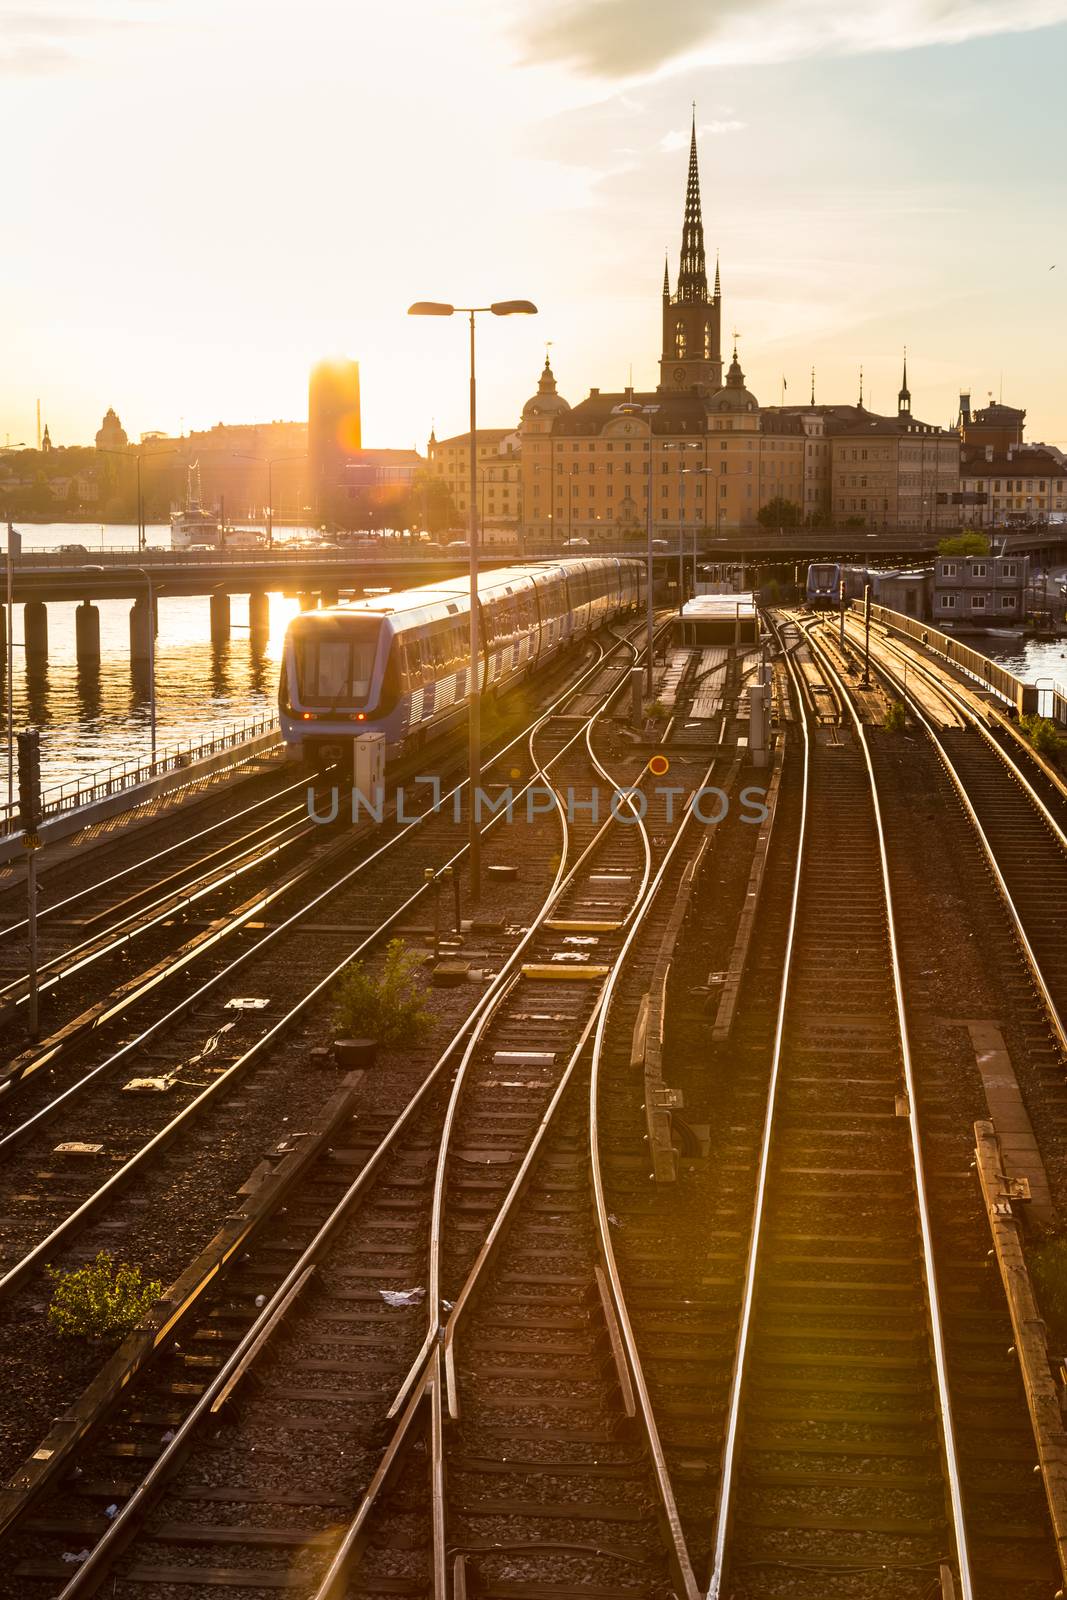 Railway tracks and trains near Stockholm's main train station in Norrmalm area, Stockholm, Sweden in sunset.  Silhouette of city hall and cathedral in background. Vertical composition.